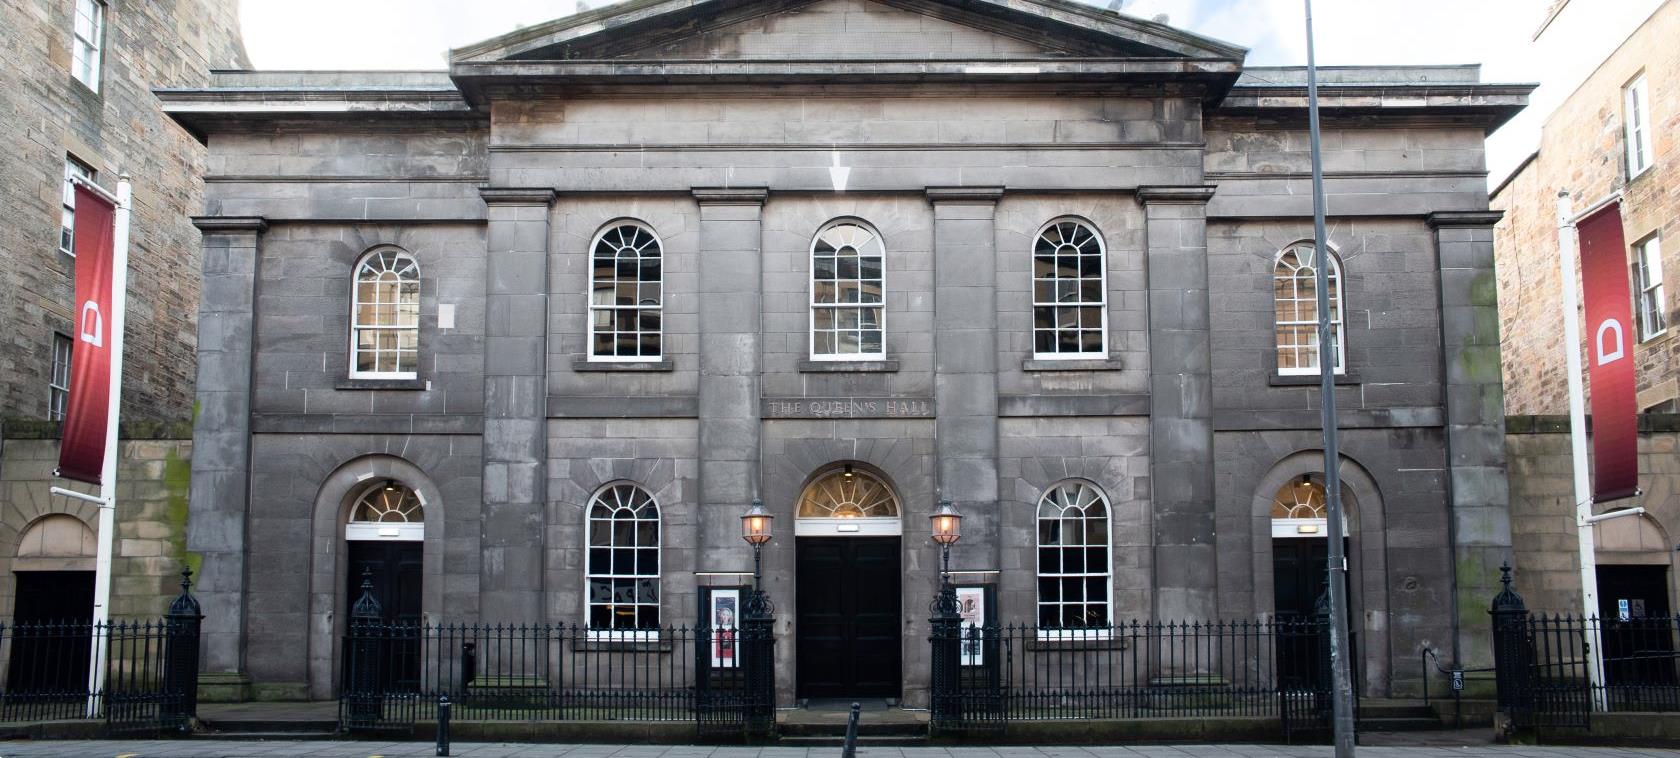 The outside of The Queen's Hall is a large Georgian building with a clock tower, black doors and railings, arched windows and red flags with white arches on white flagpoles.